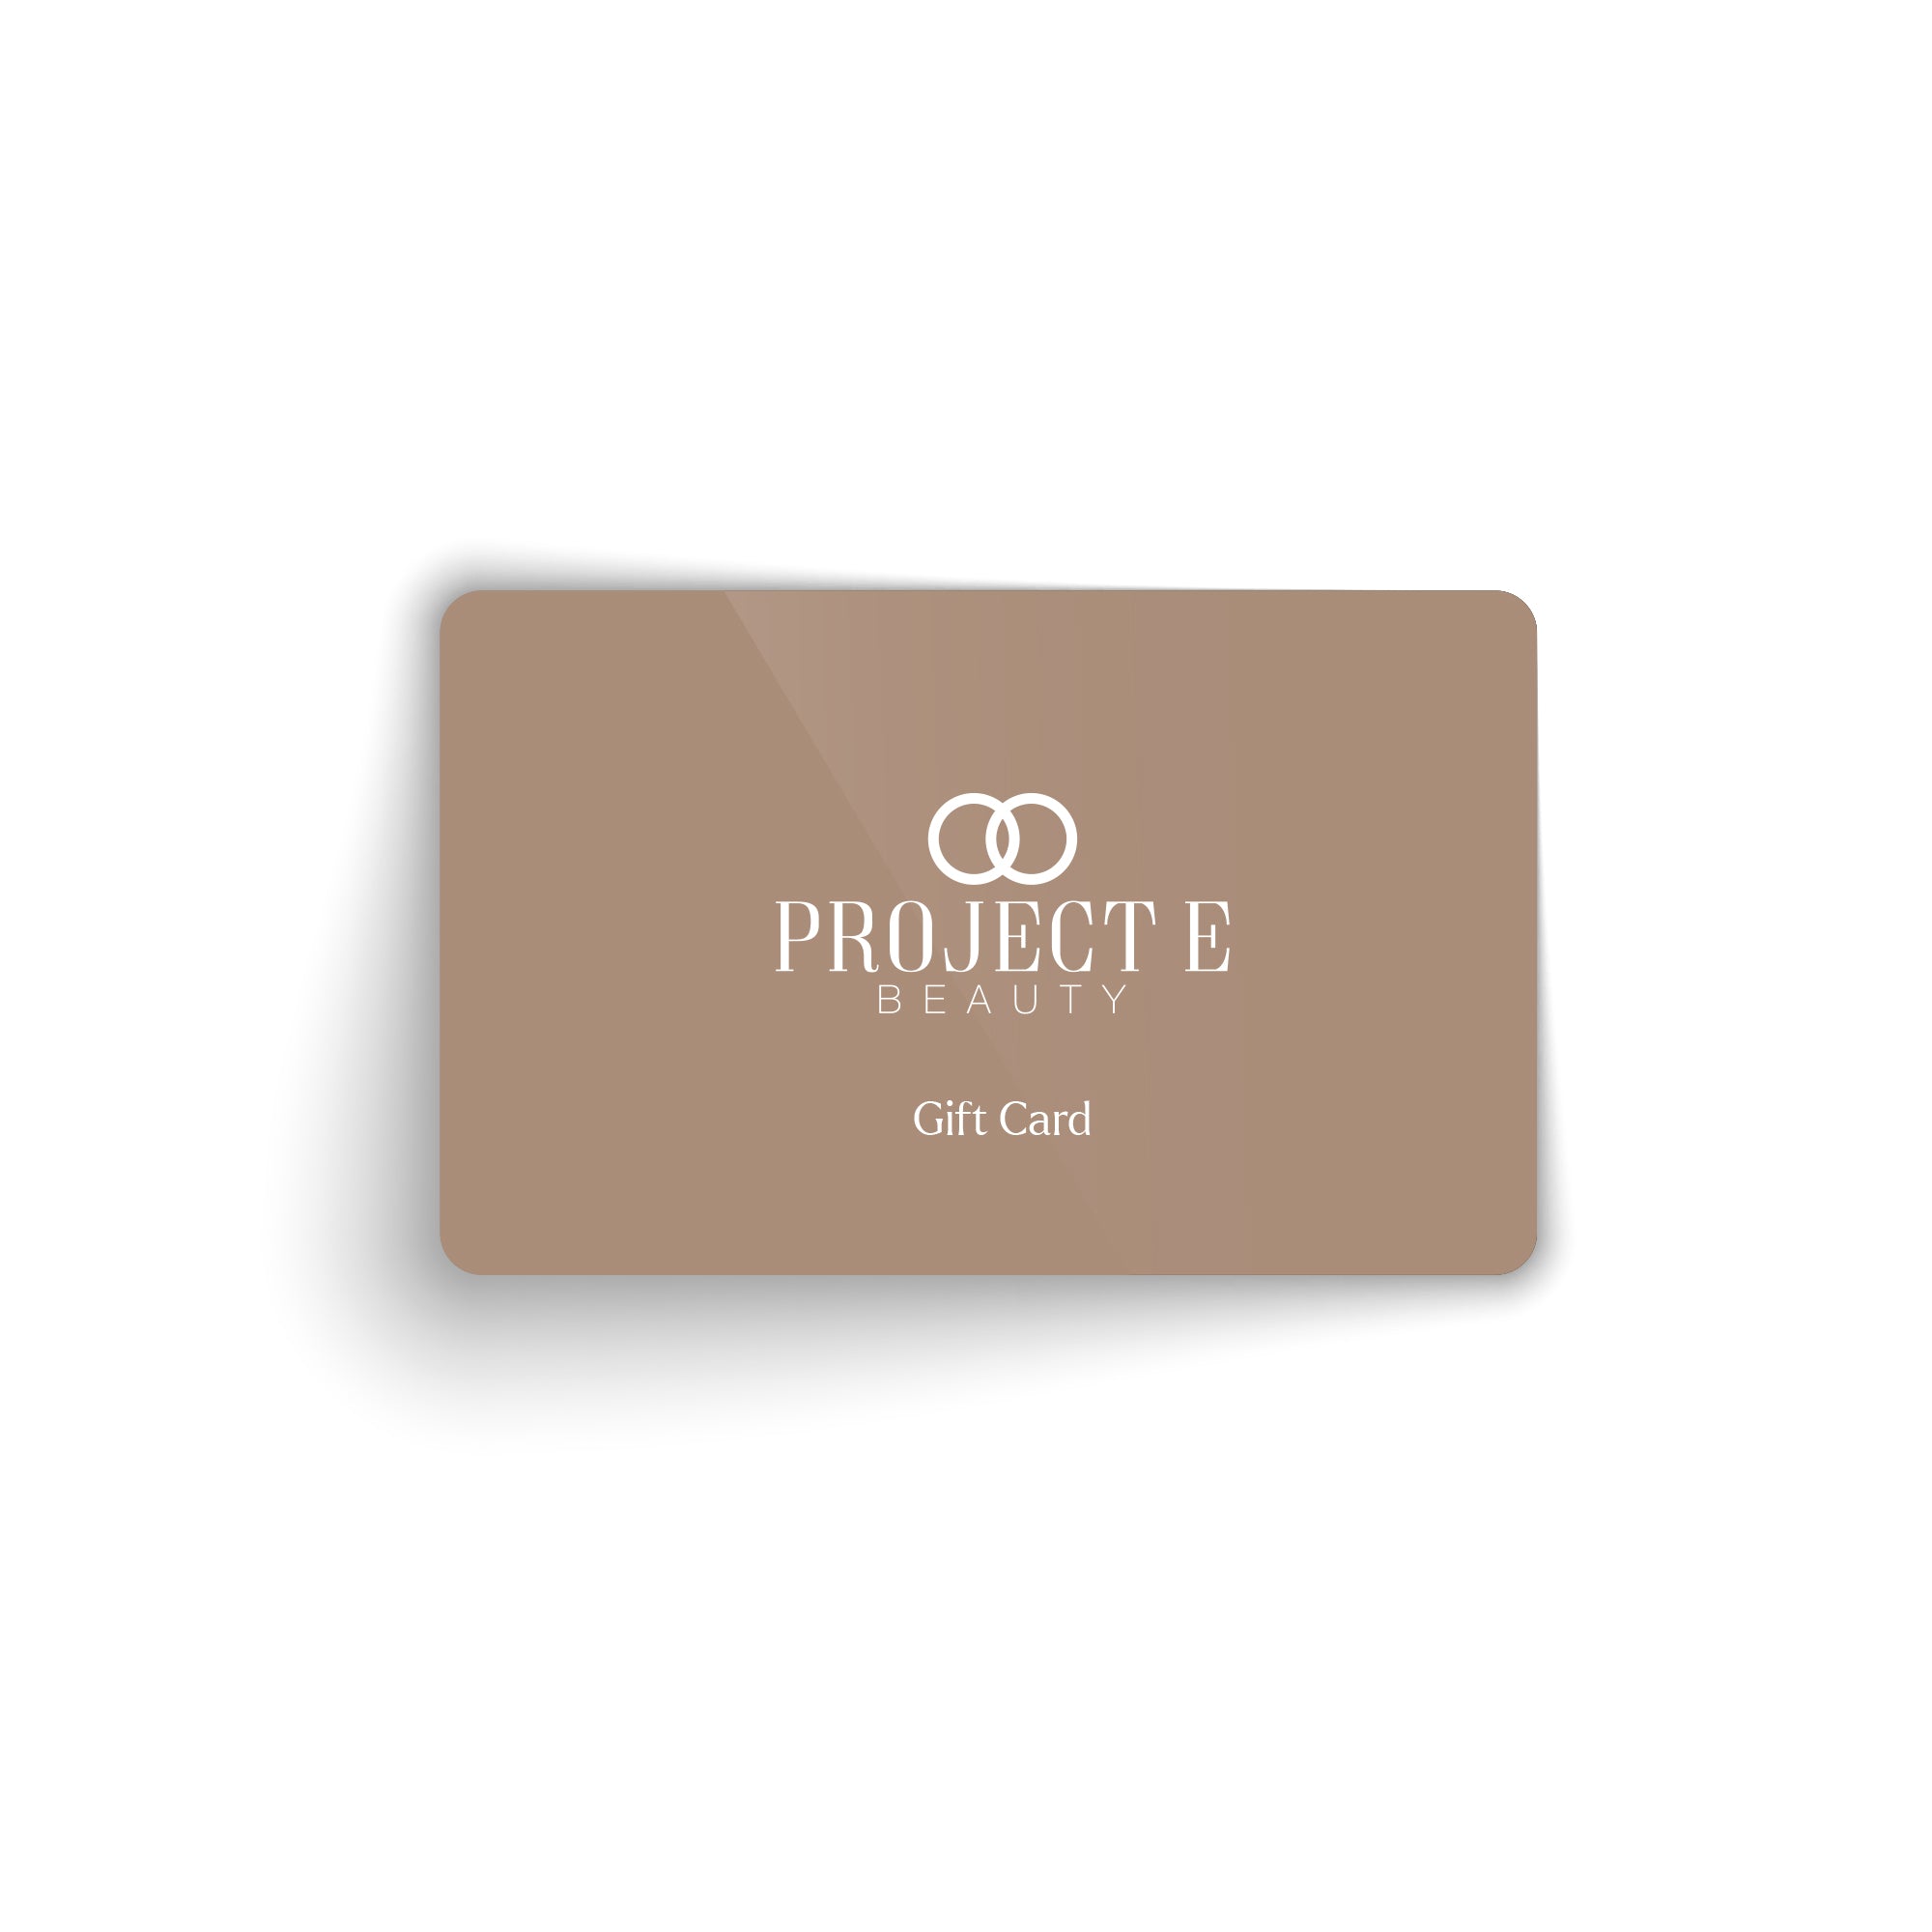 Gift Card - Project E Beauty